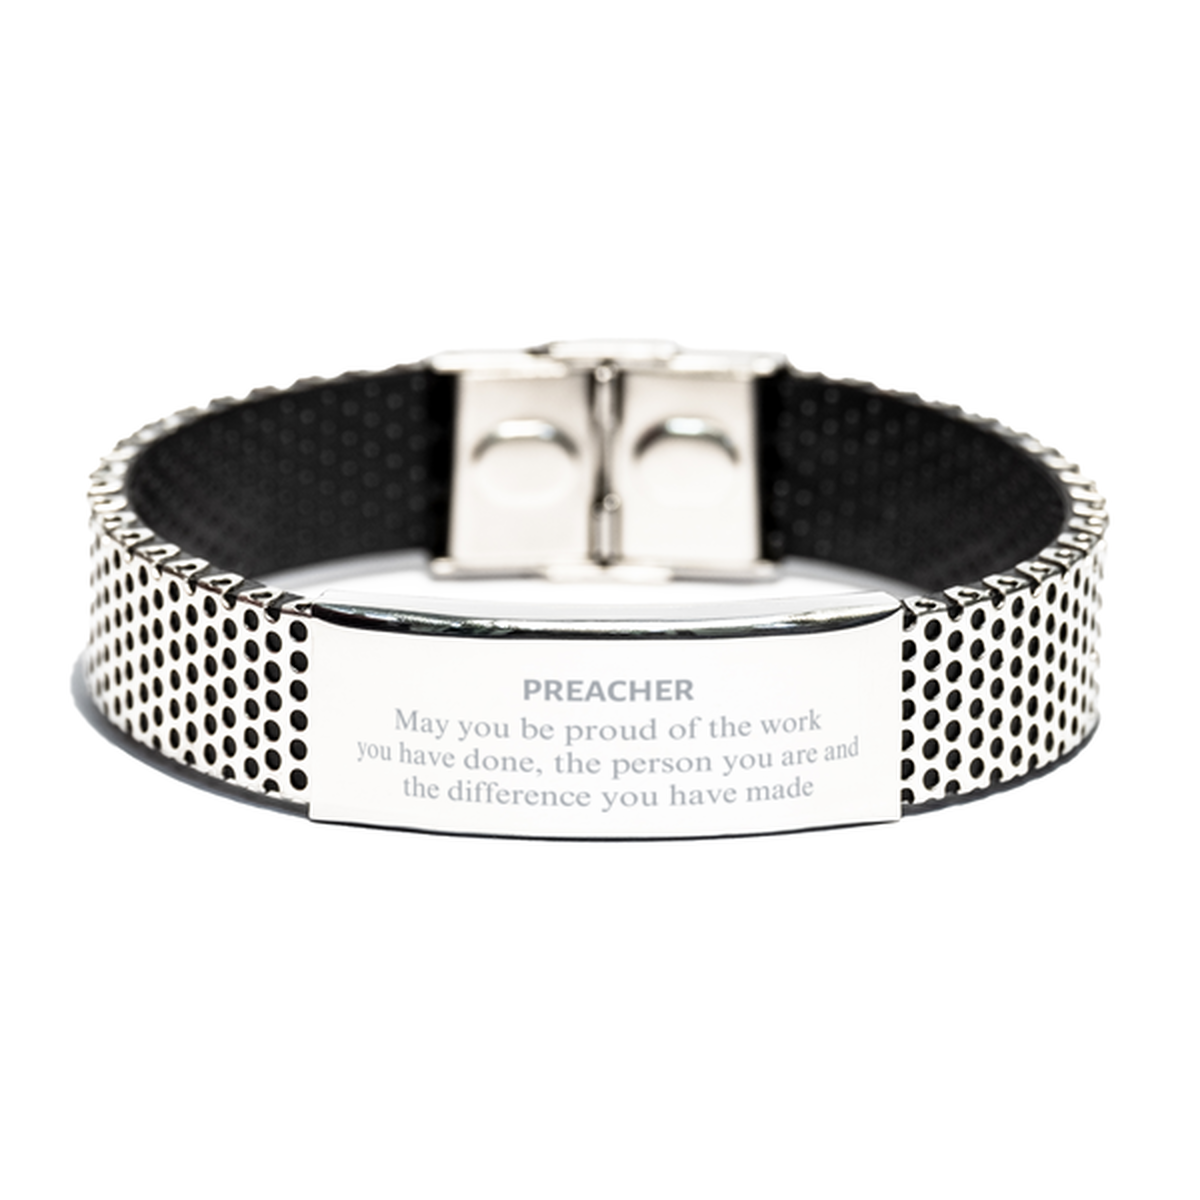 Preacher May you be proud of the work you have done, Retirement Preacher Stainless Steel Bracelet for Colleague Appreciation Gifts Amazing for Preacher